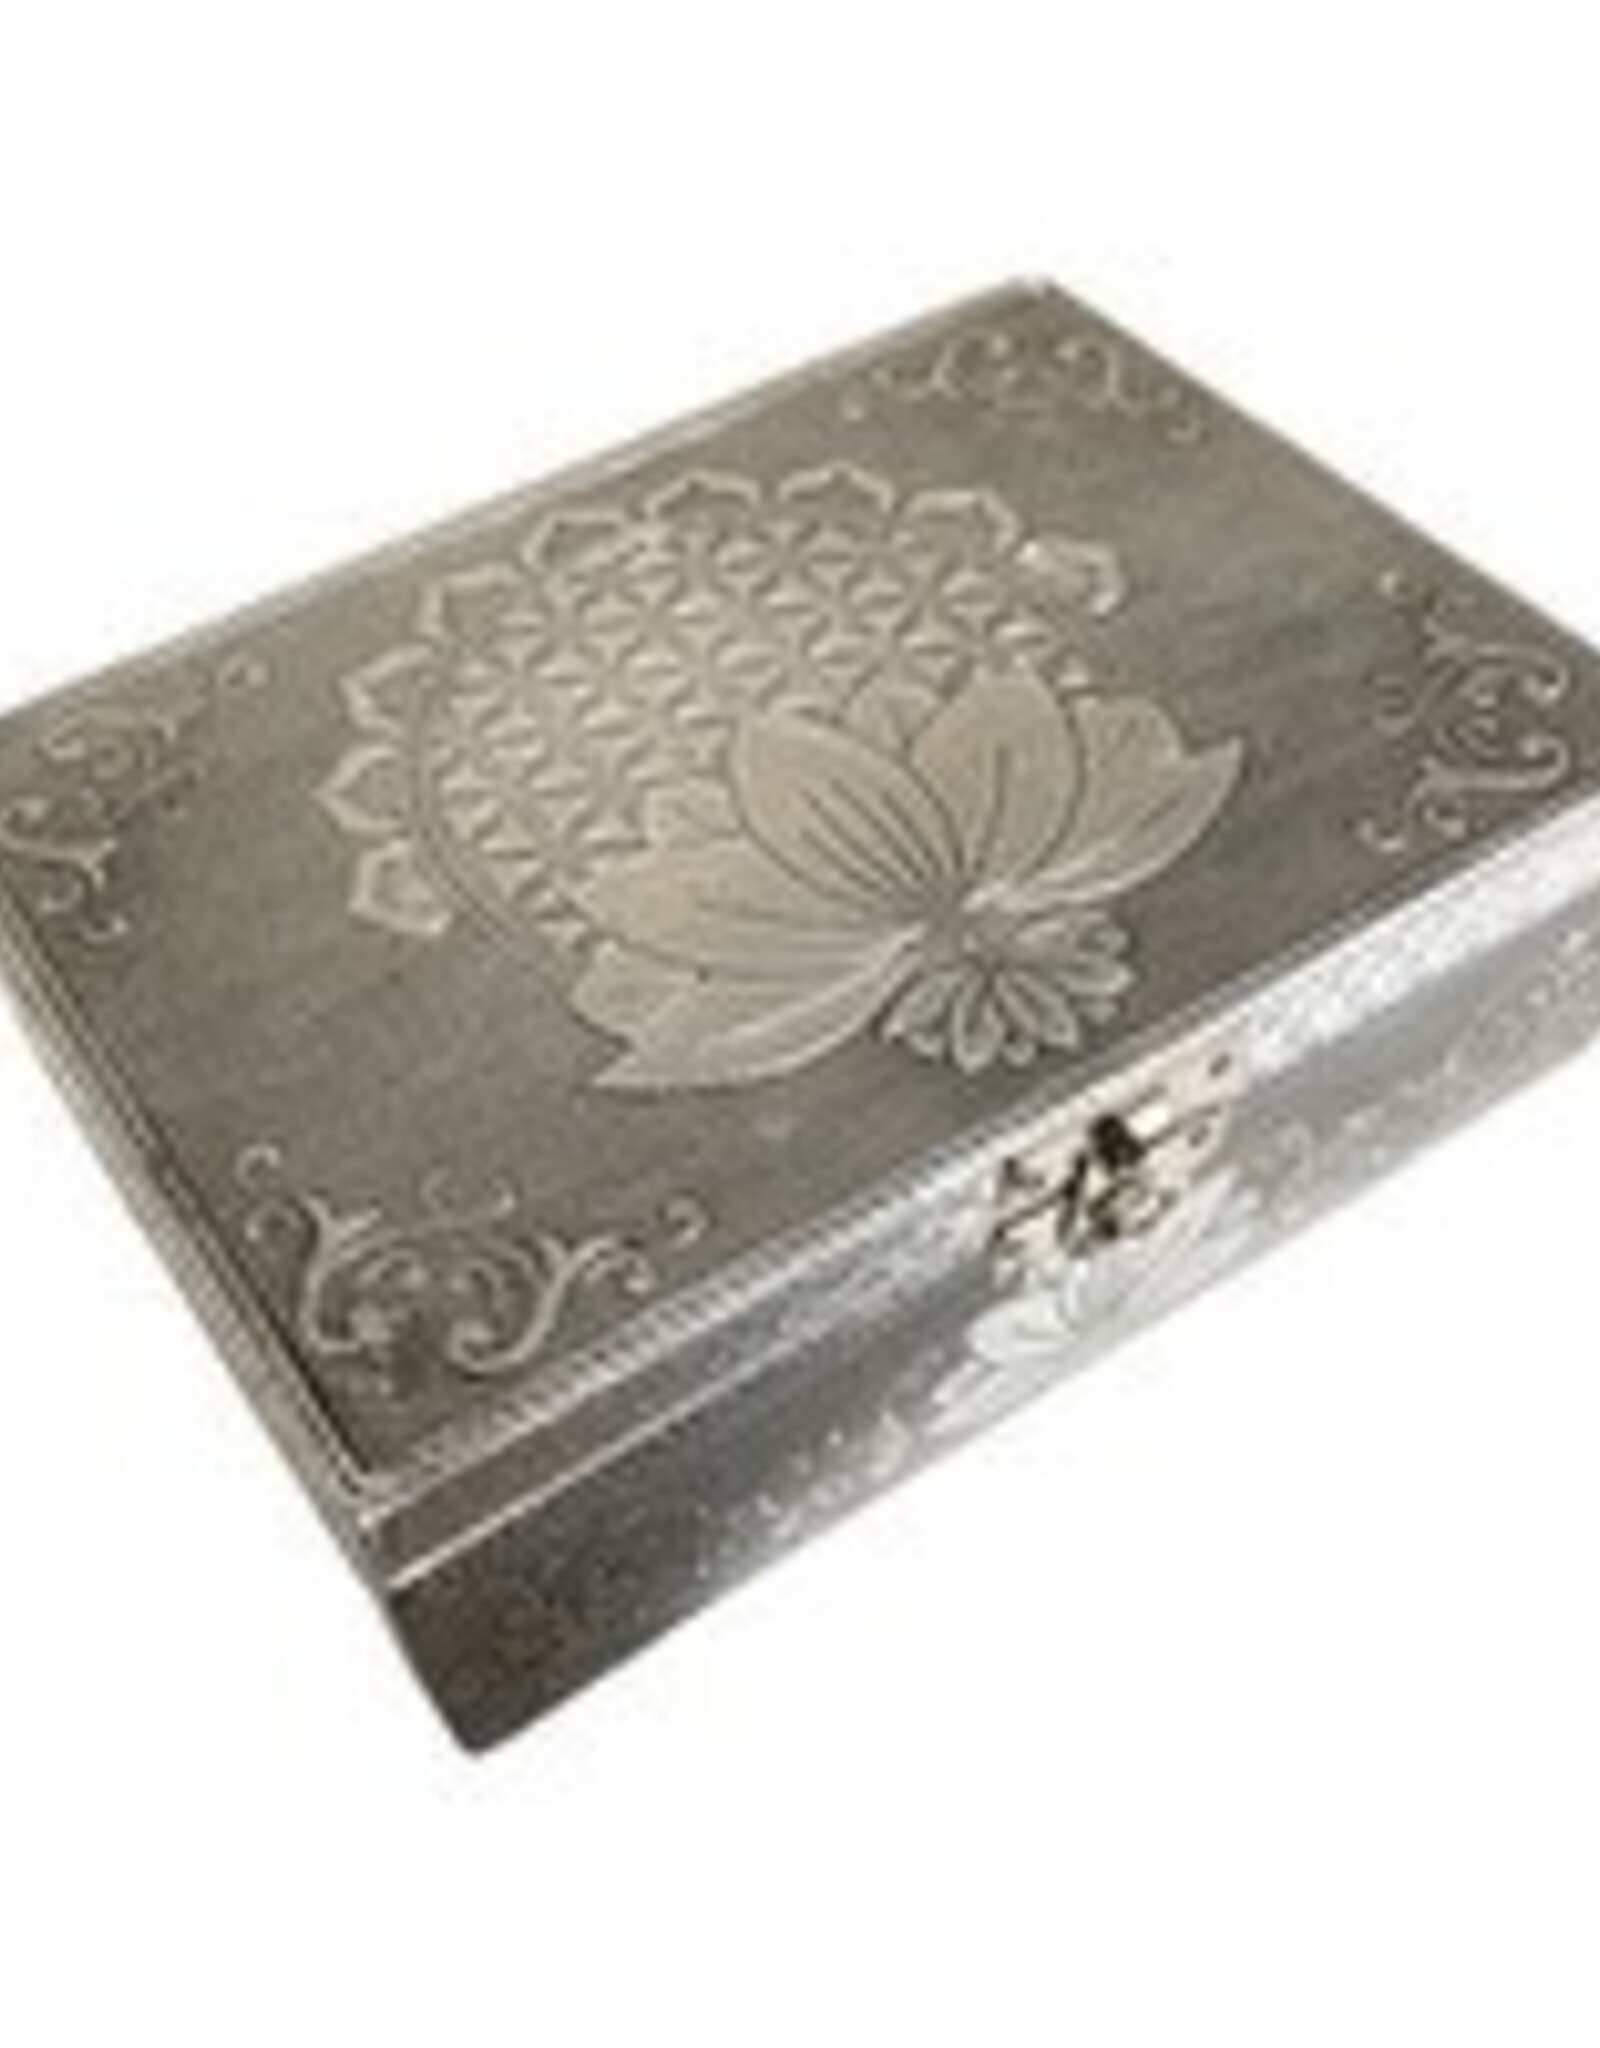 Box - Carved METAL Over Wood - 4.75 x 6.75 inch